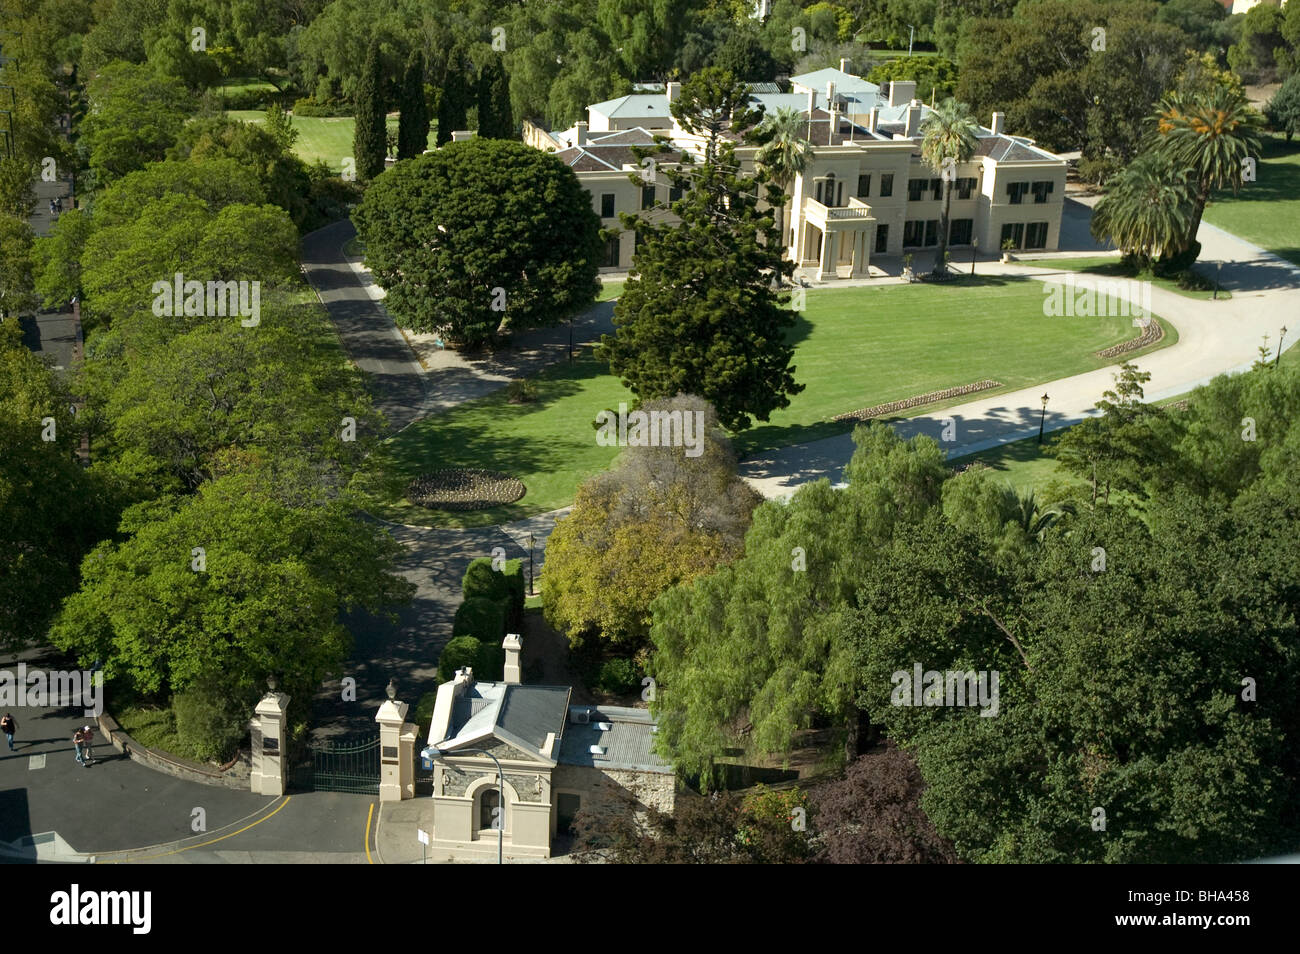 Exterior view of Government House, North Terrace, Adelaide, South Australia Stock Photo